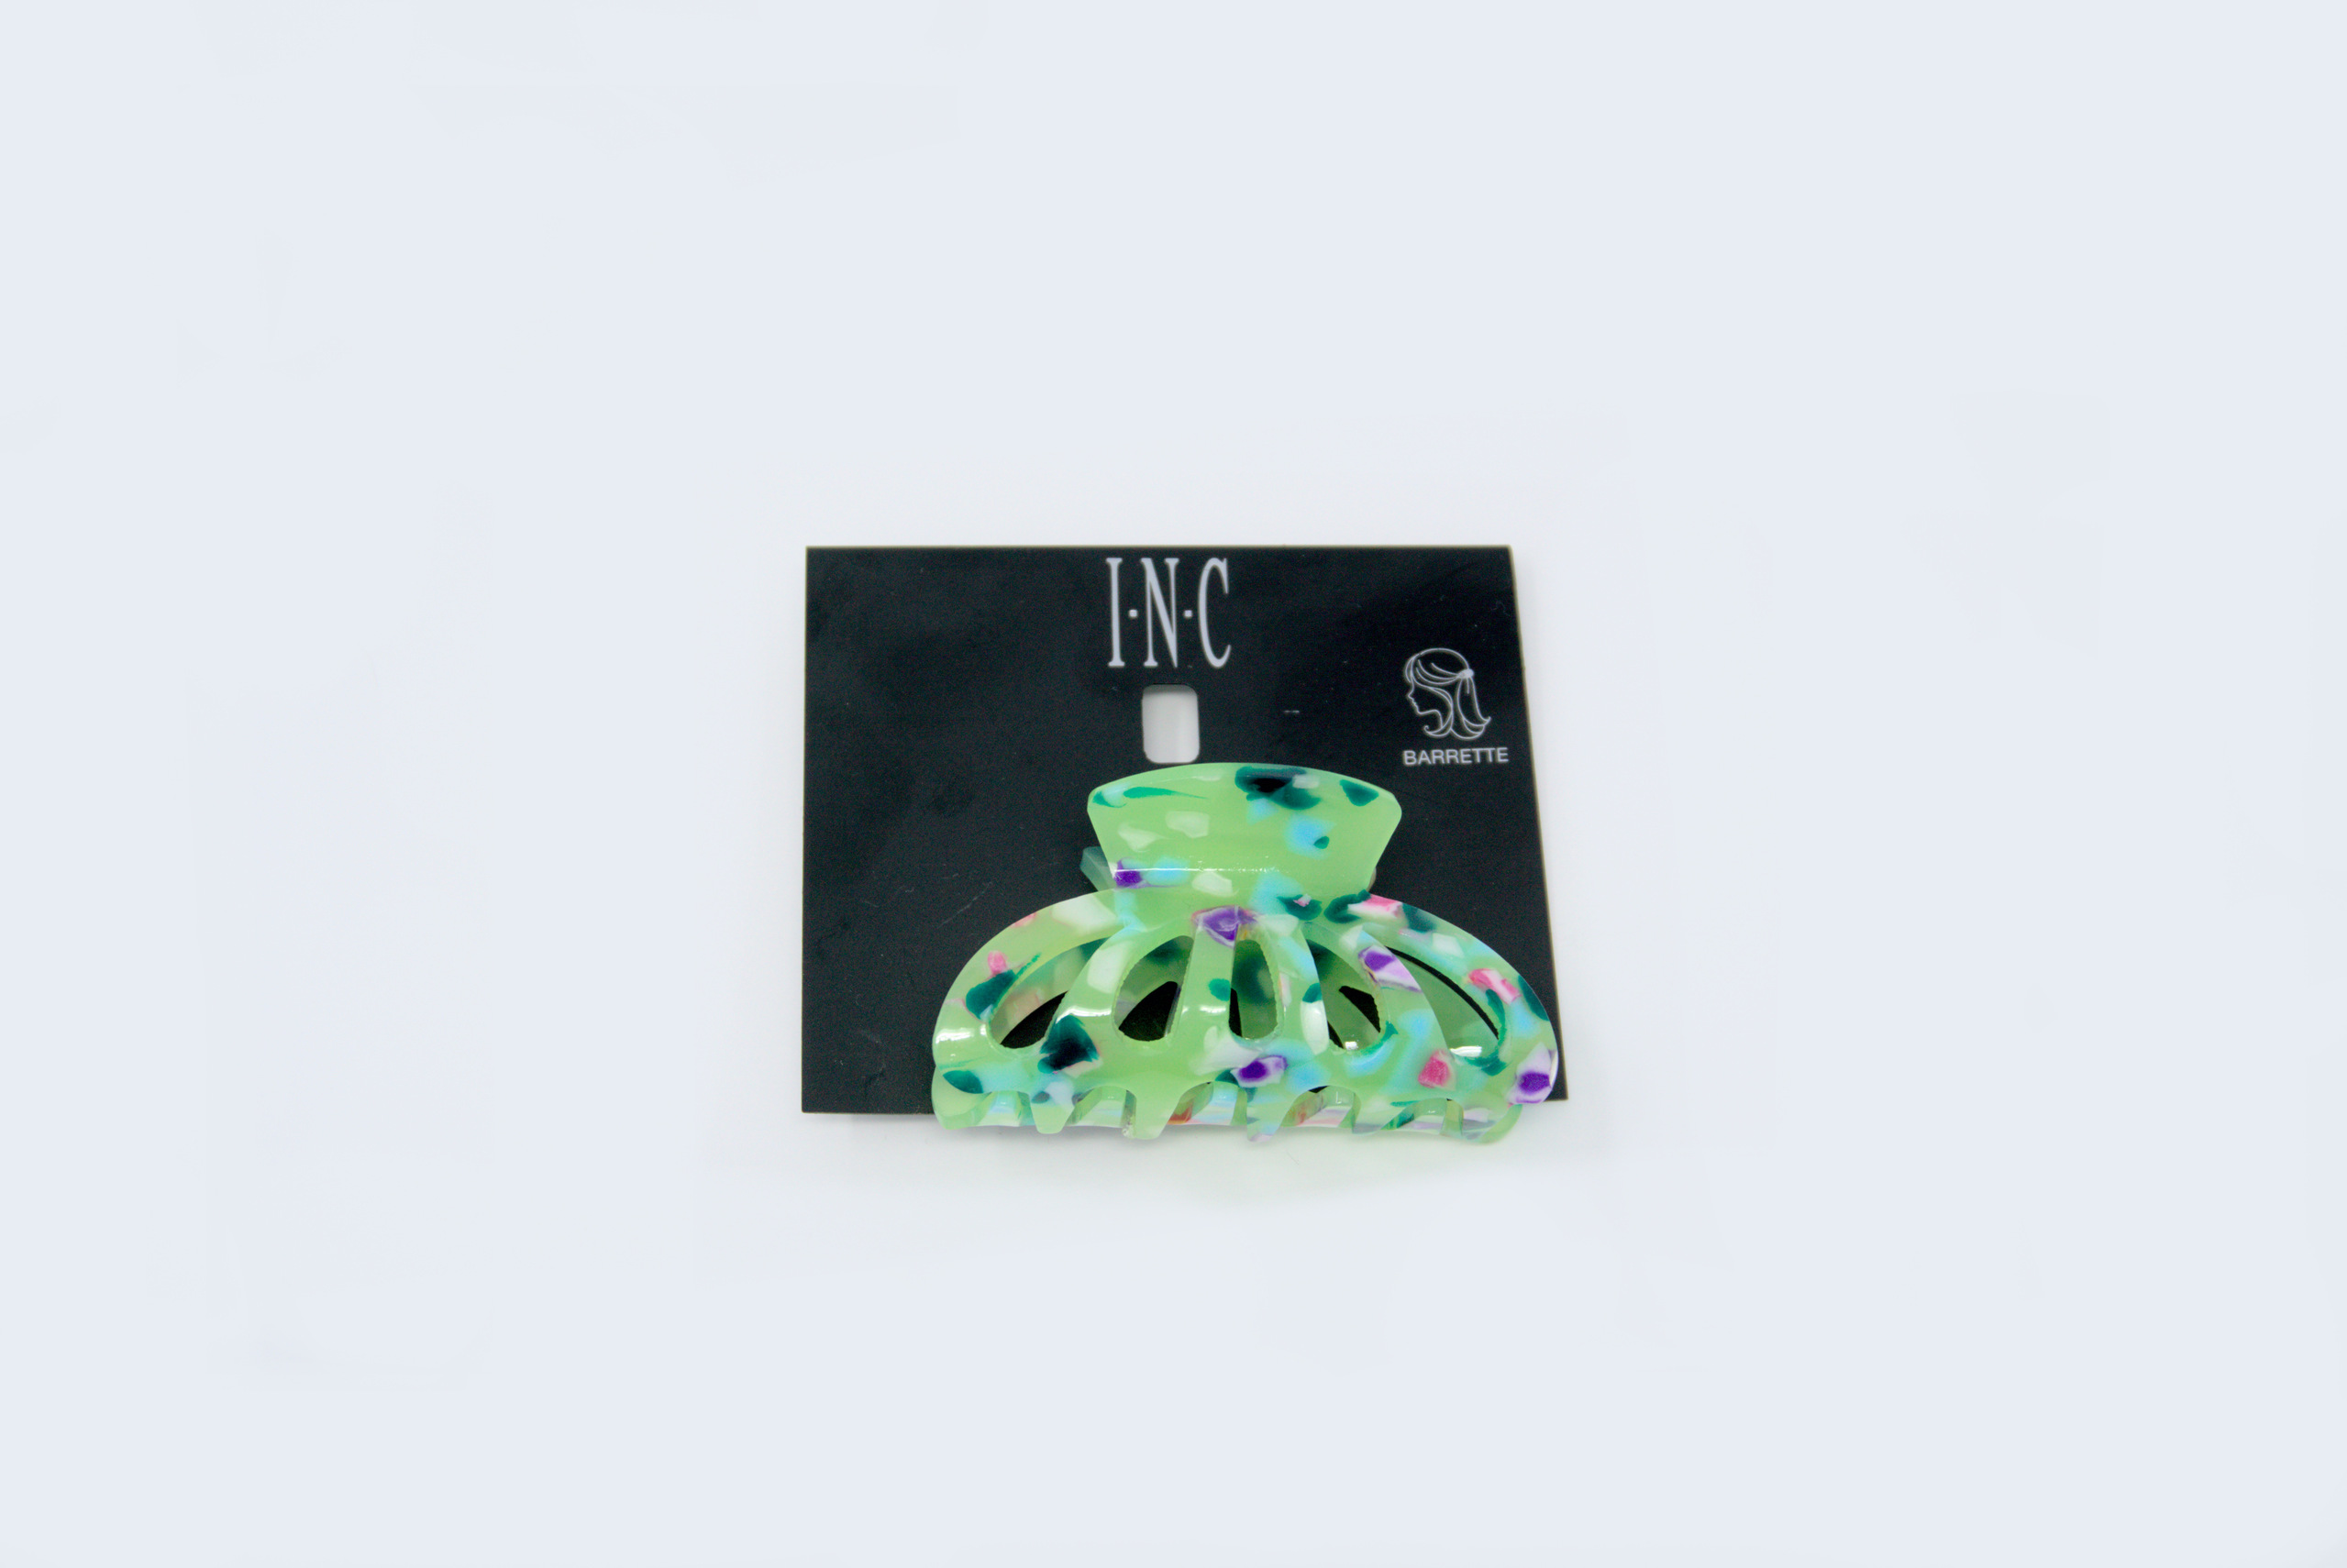 Charm and Lovely Quality Fashion Accessories introduces INC green color claw clip